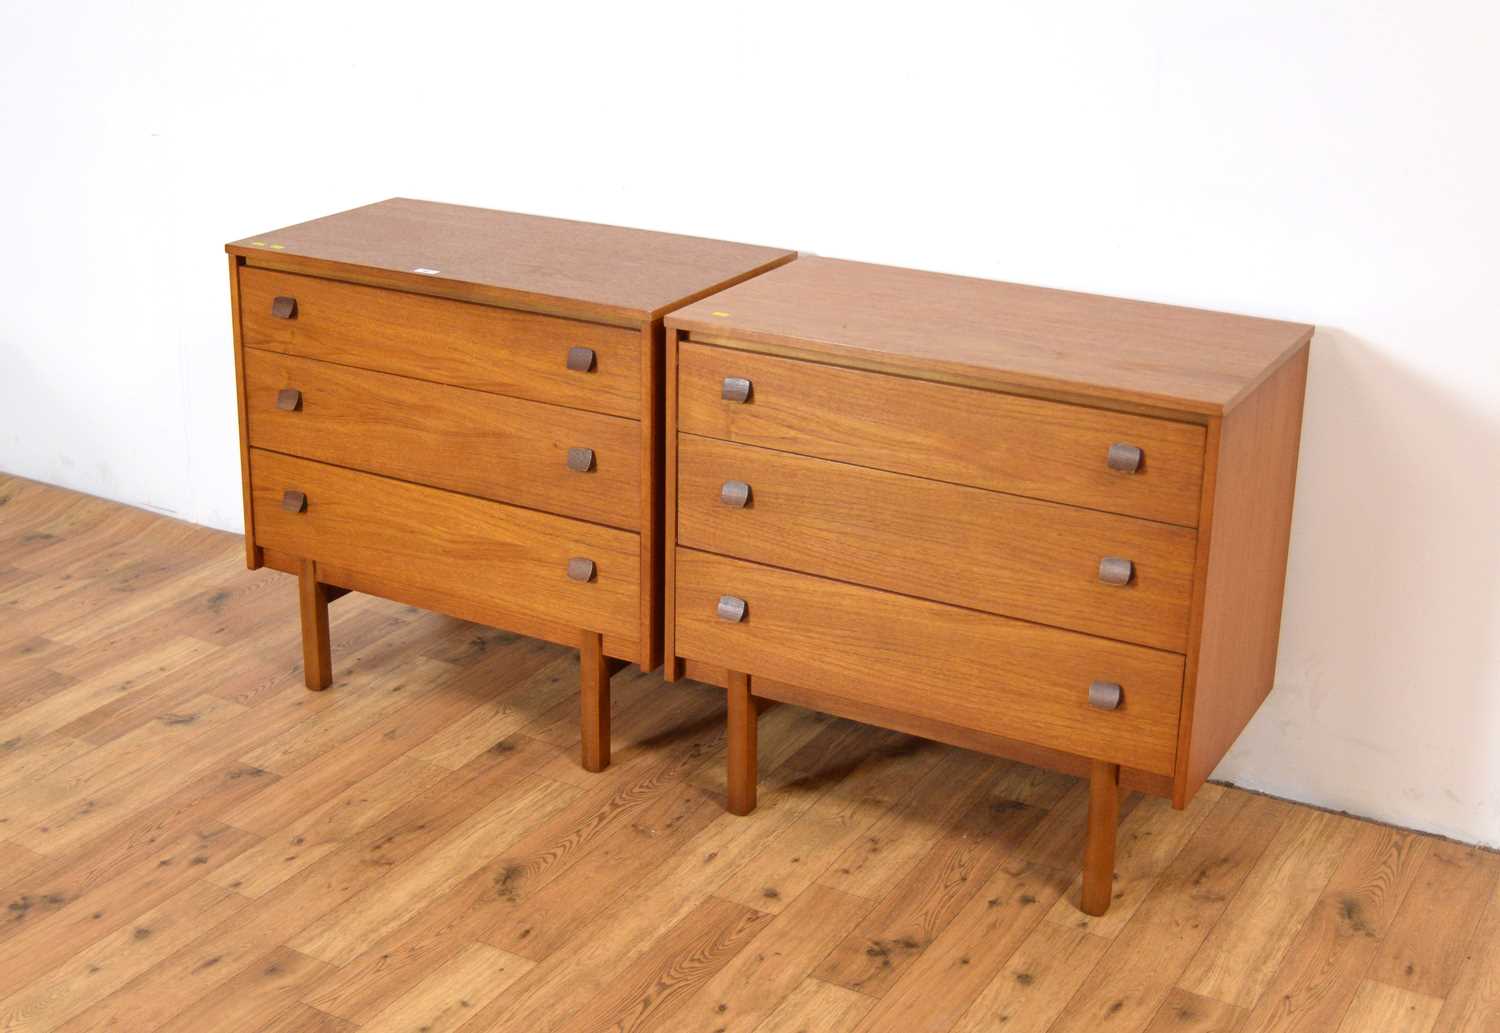 A pair of retro teak chest of drawers - Image 2 of 5